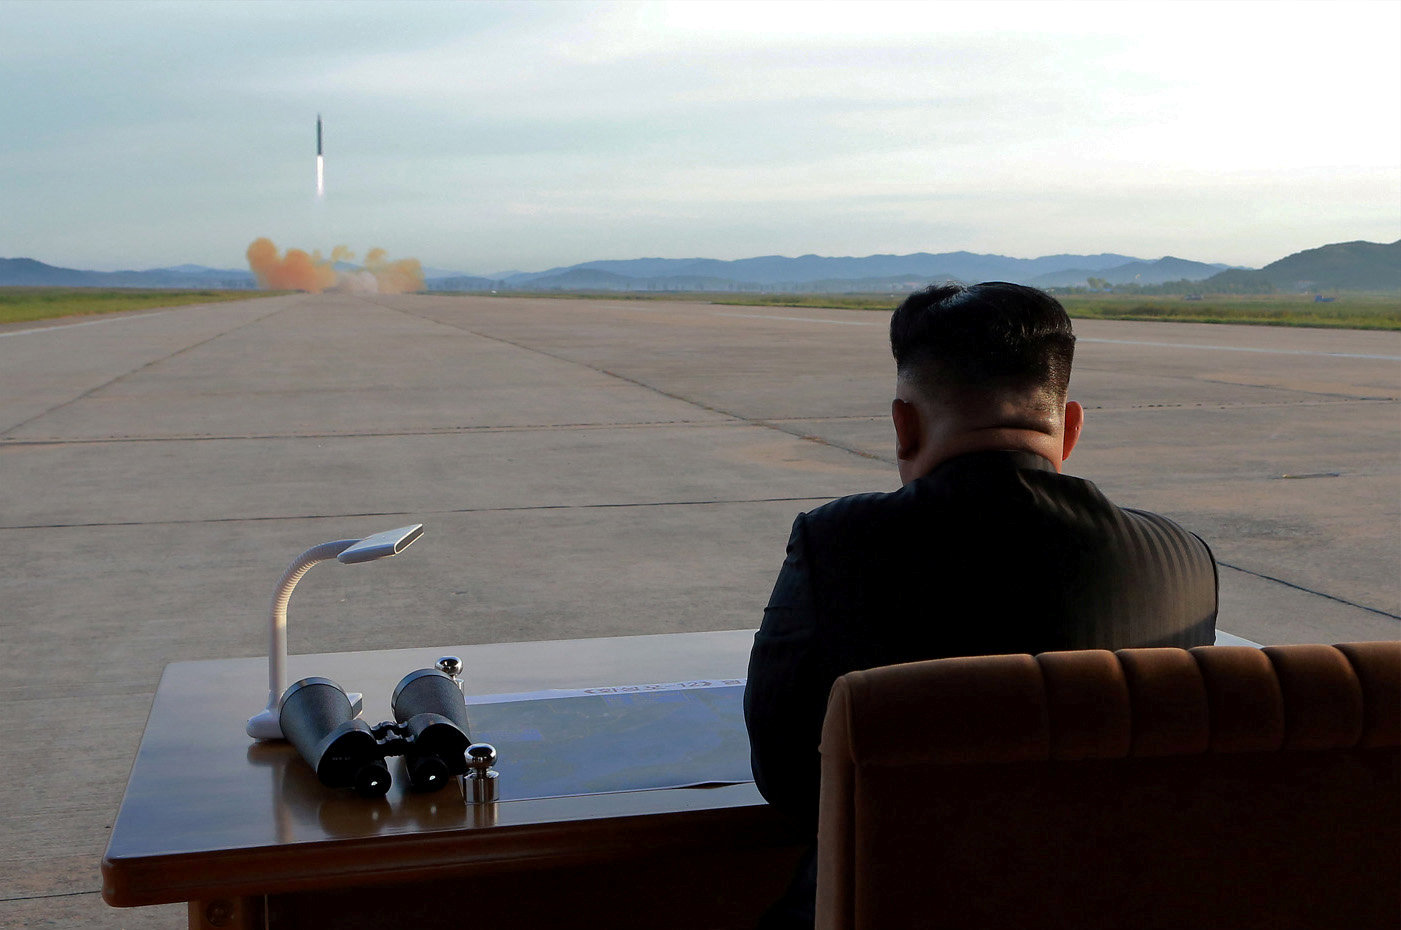 Flurry of activity hints at North Korea missile test